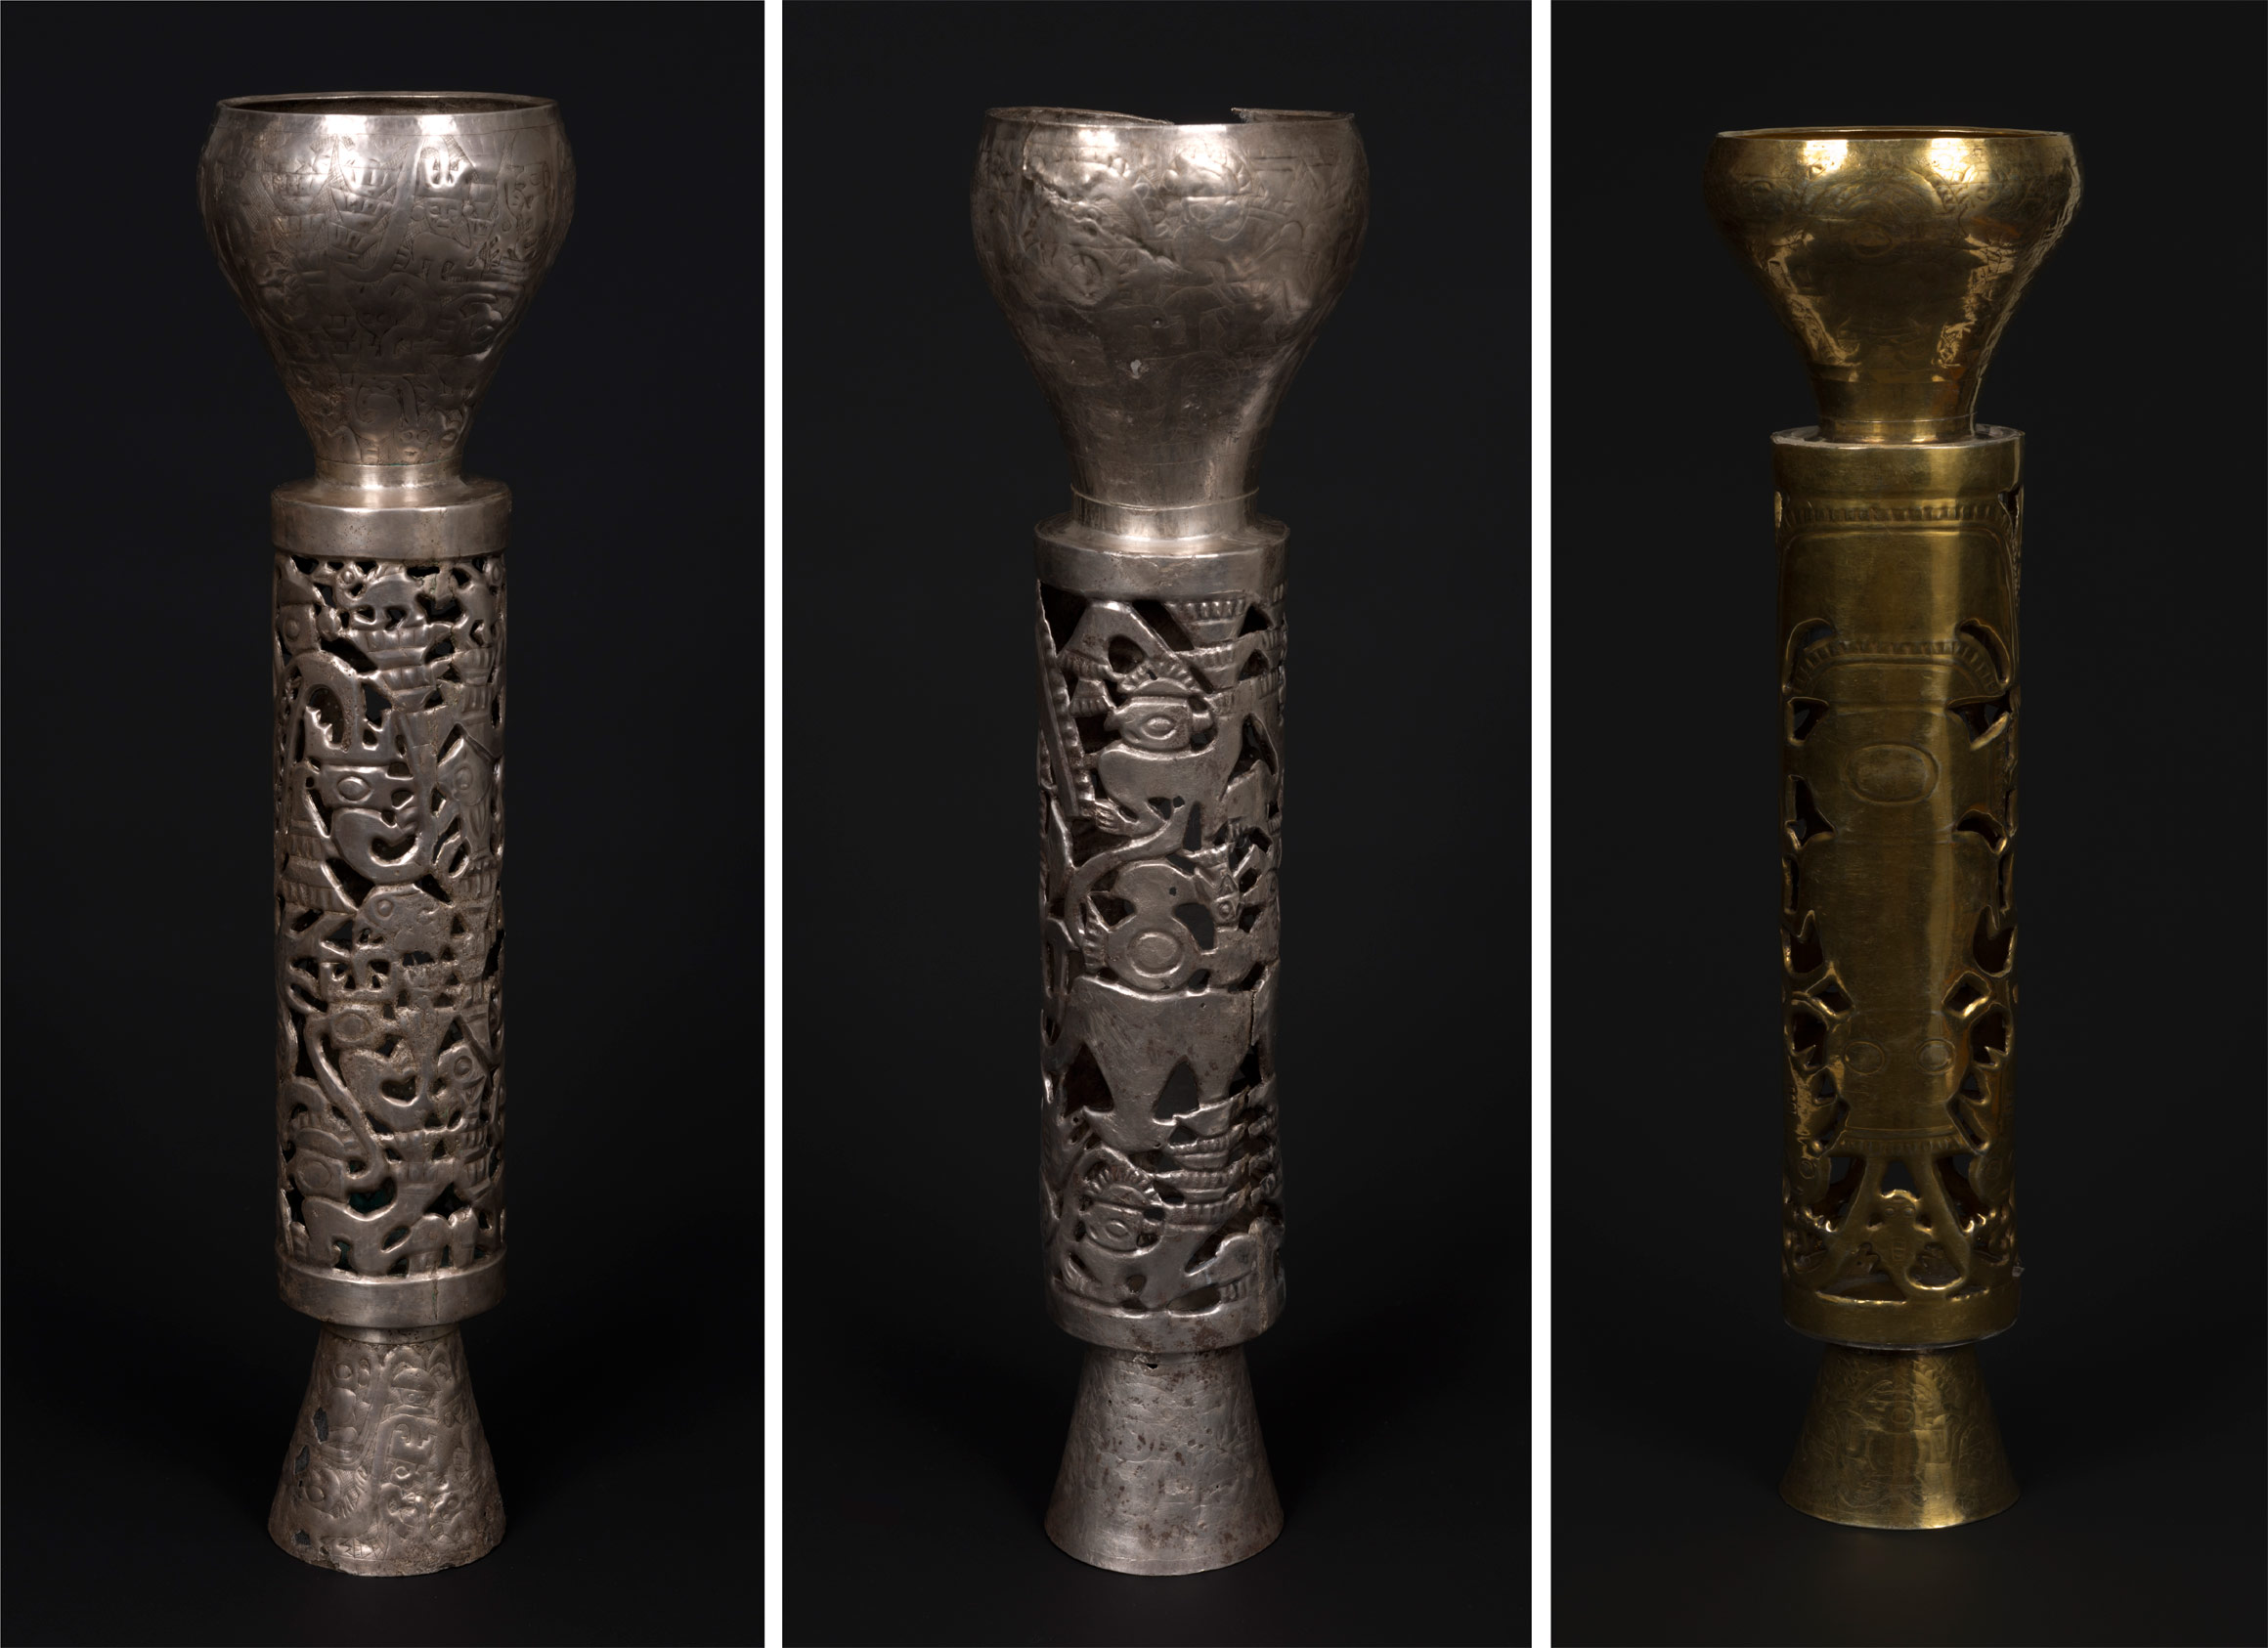 Three golden goblets from the ancient Americas with elaborate relief work